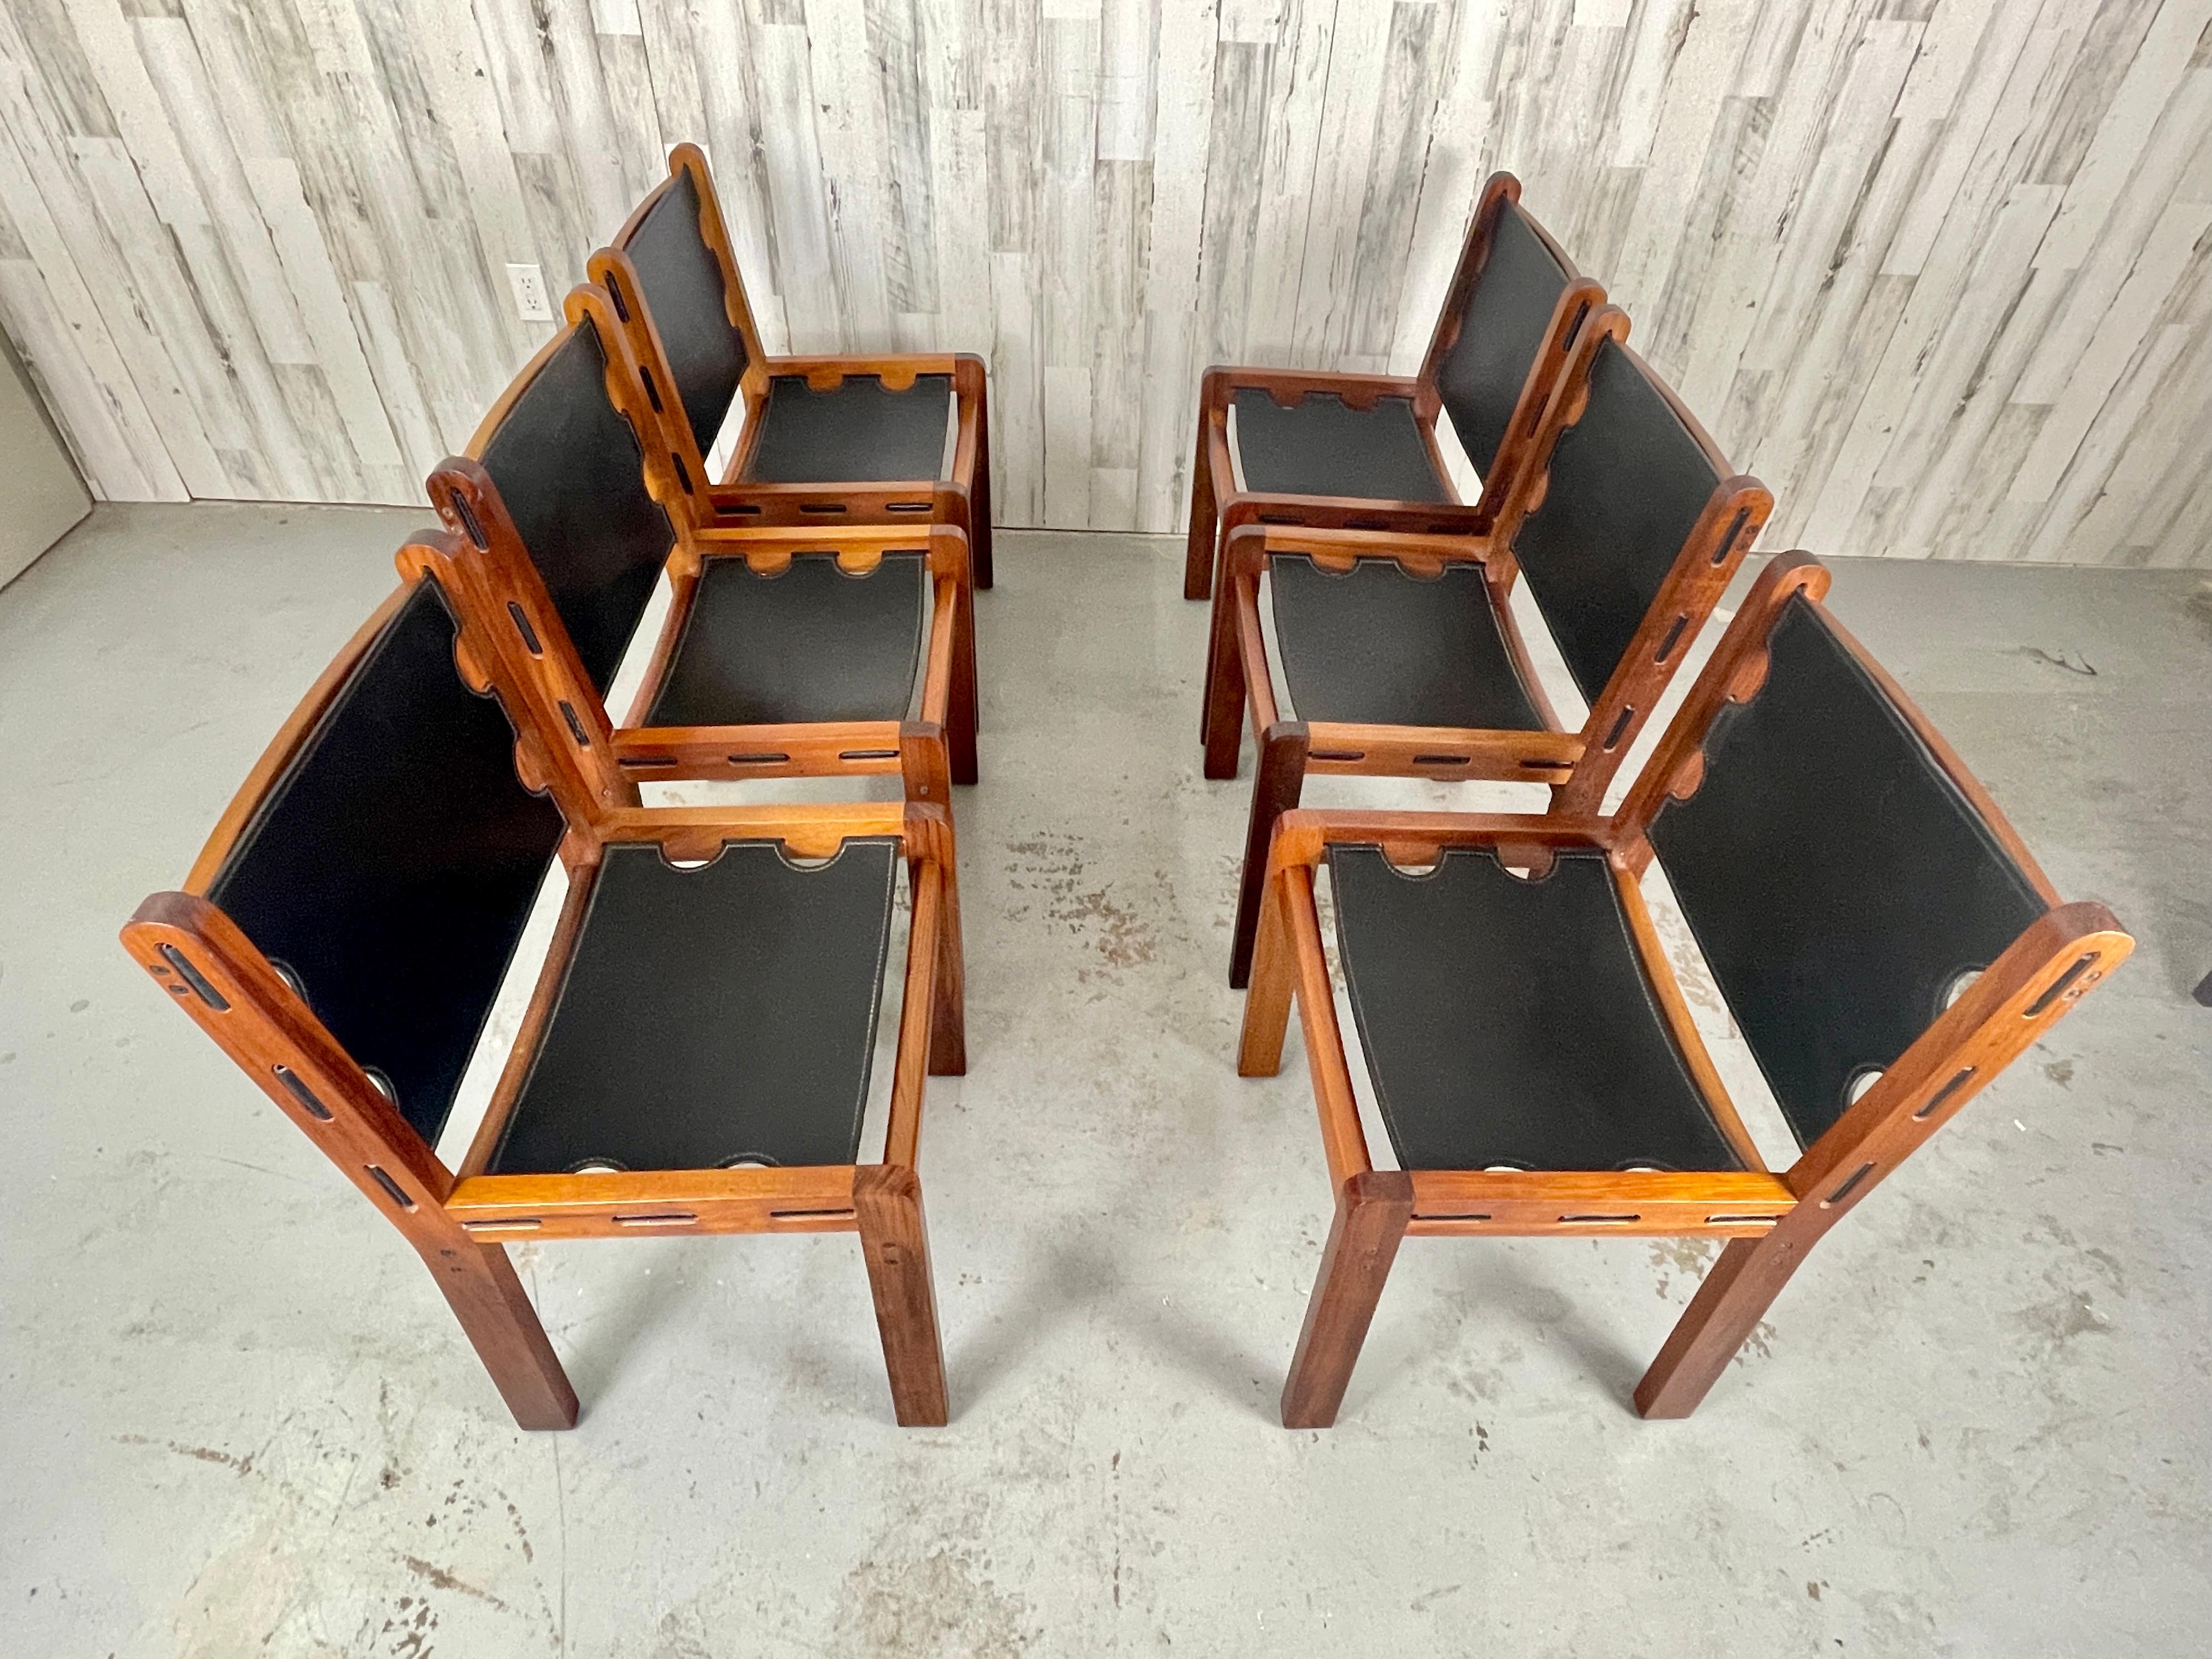 Very sturdy solid teak with heavy black leather sling seat and back makes for an very comfortable seating
Made in Australia 1974 with the Victorian Guild label underneath.